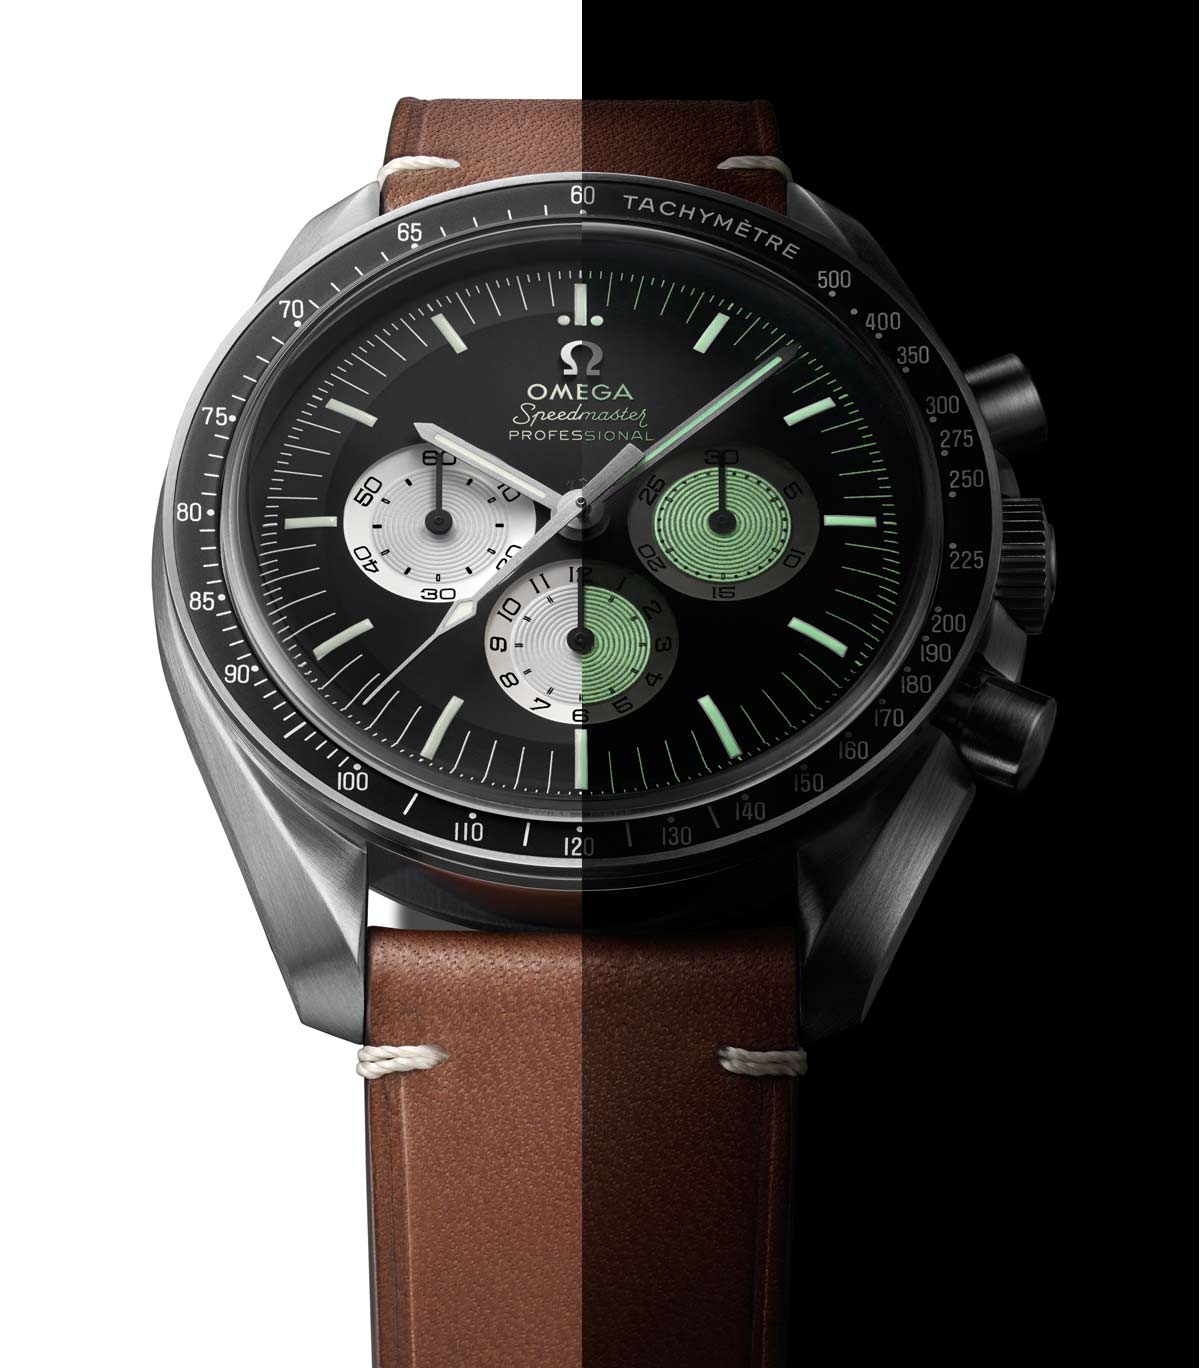 Omega - Speedmaster “Speedy Tuesday” Limited Edition | Time and Watches | The watch blog